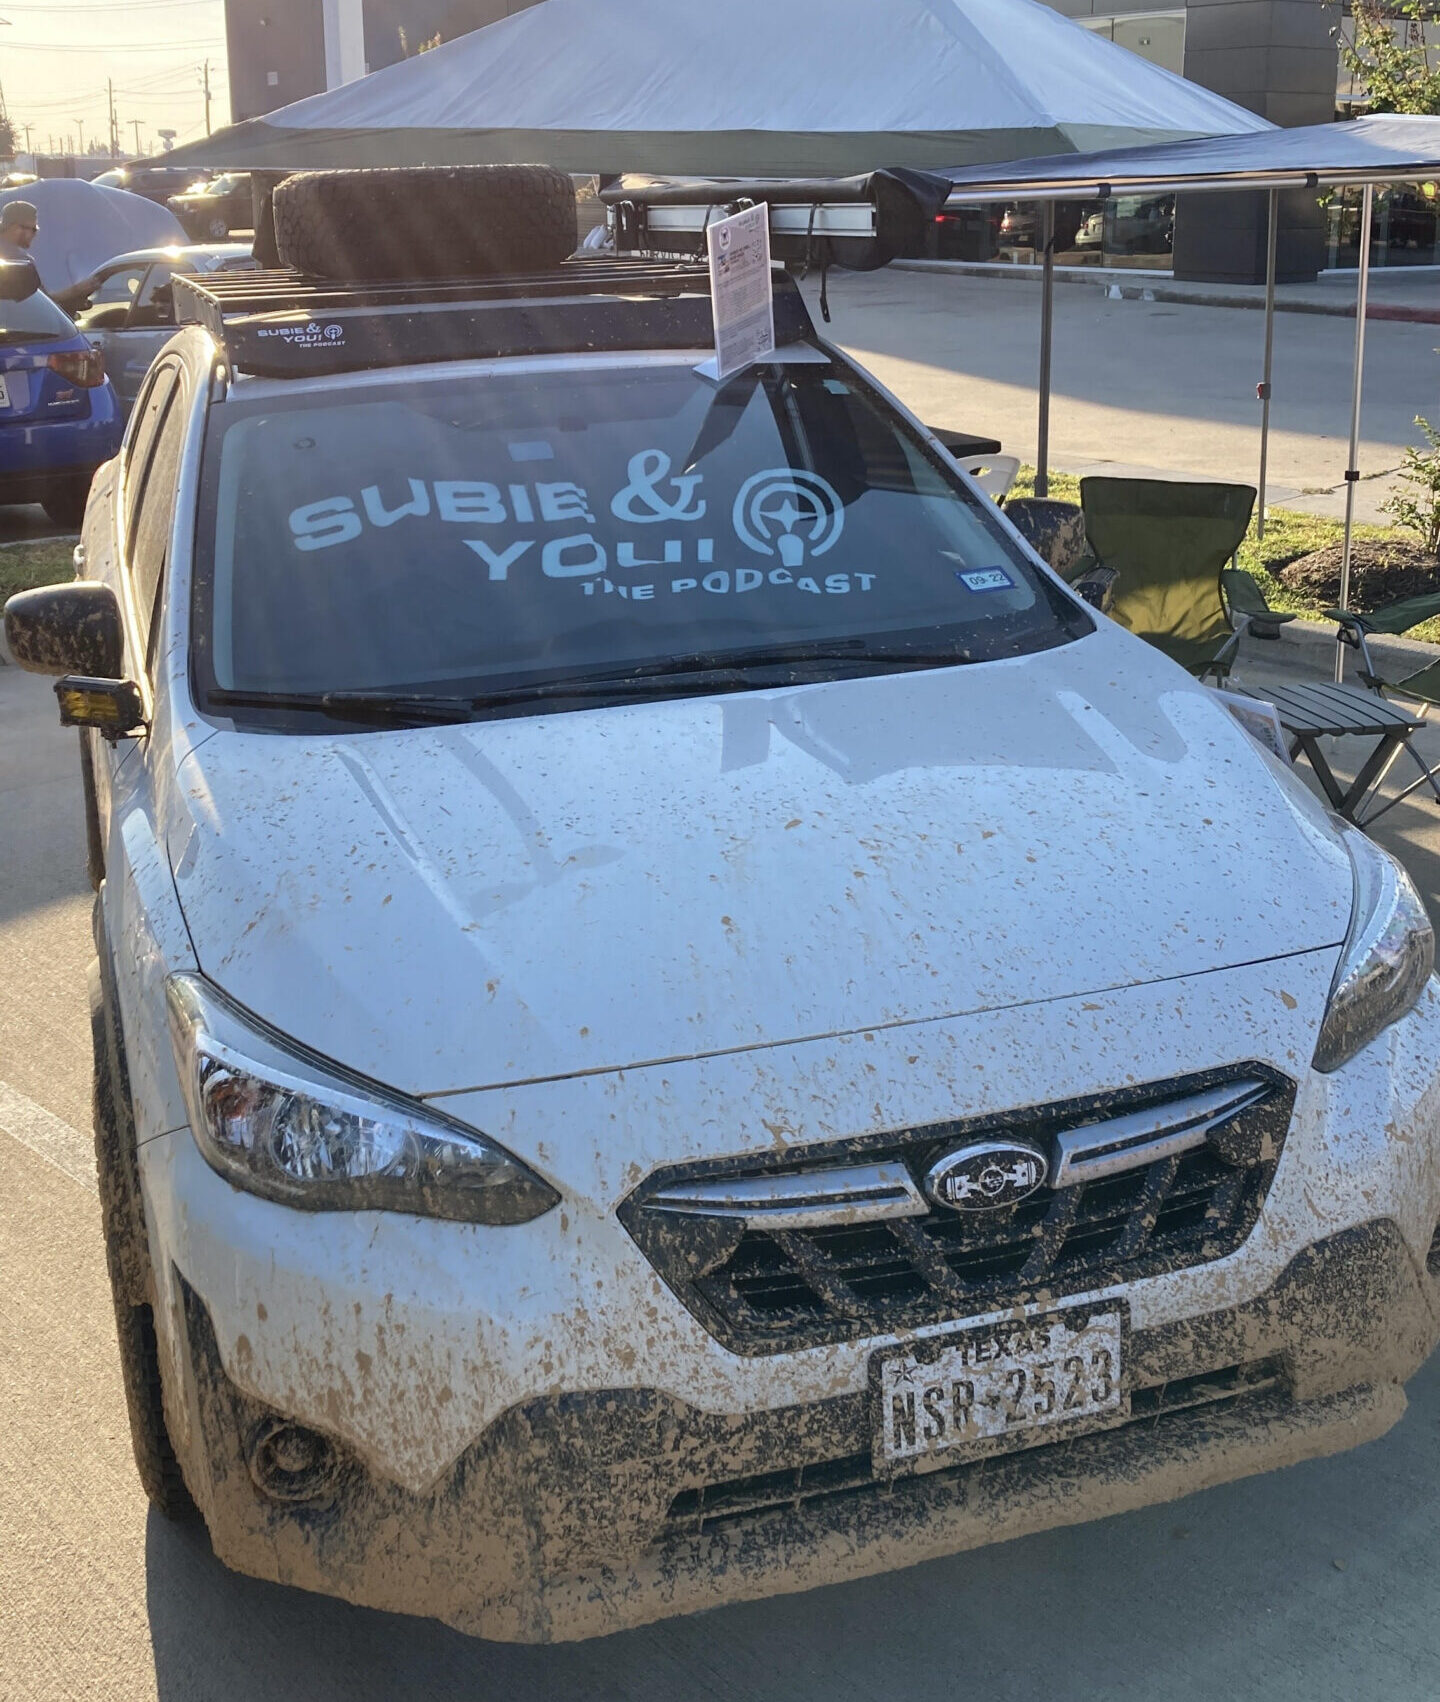 subie and you podcast at car show